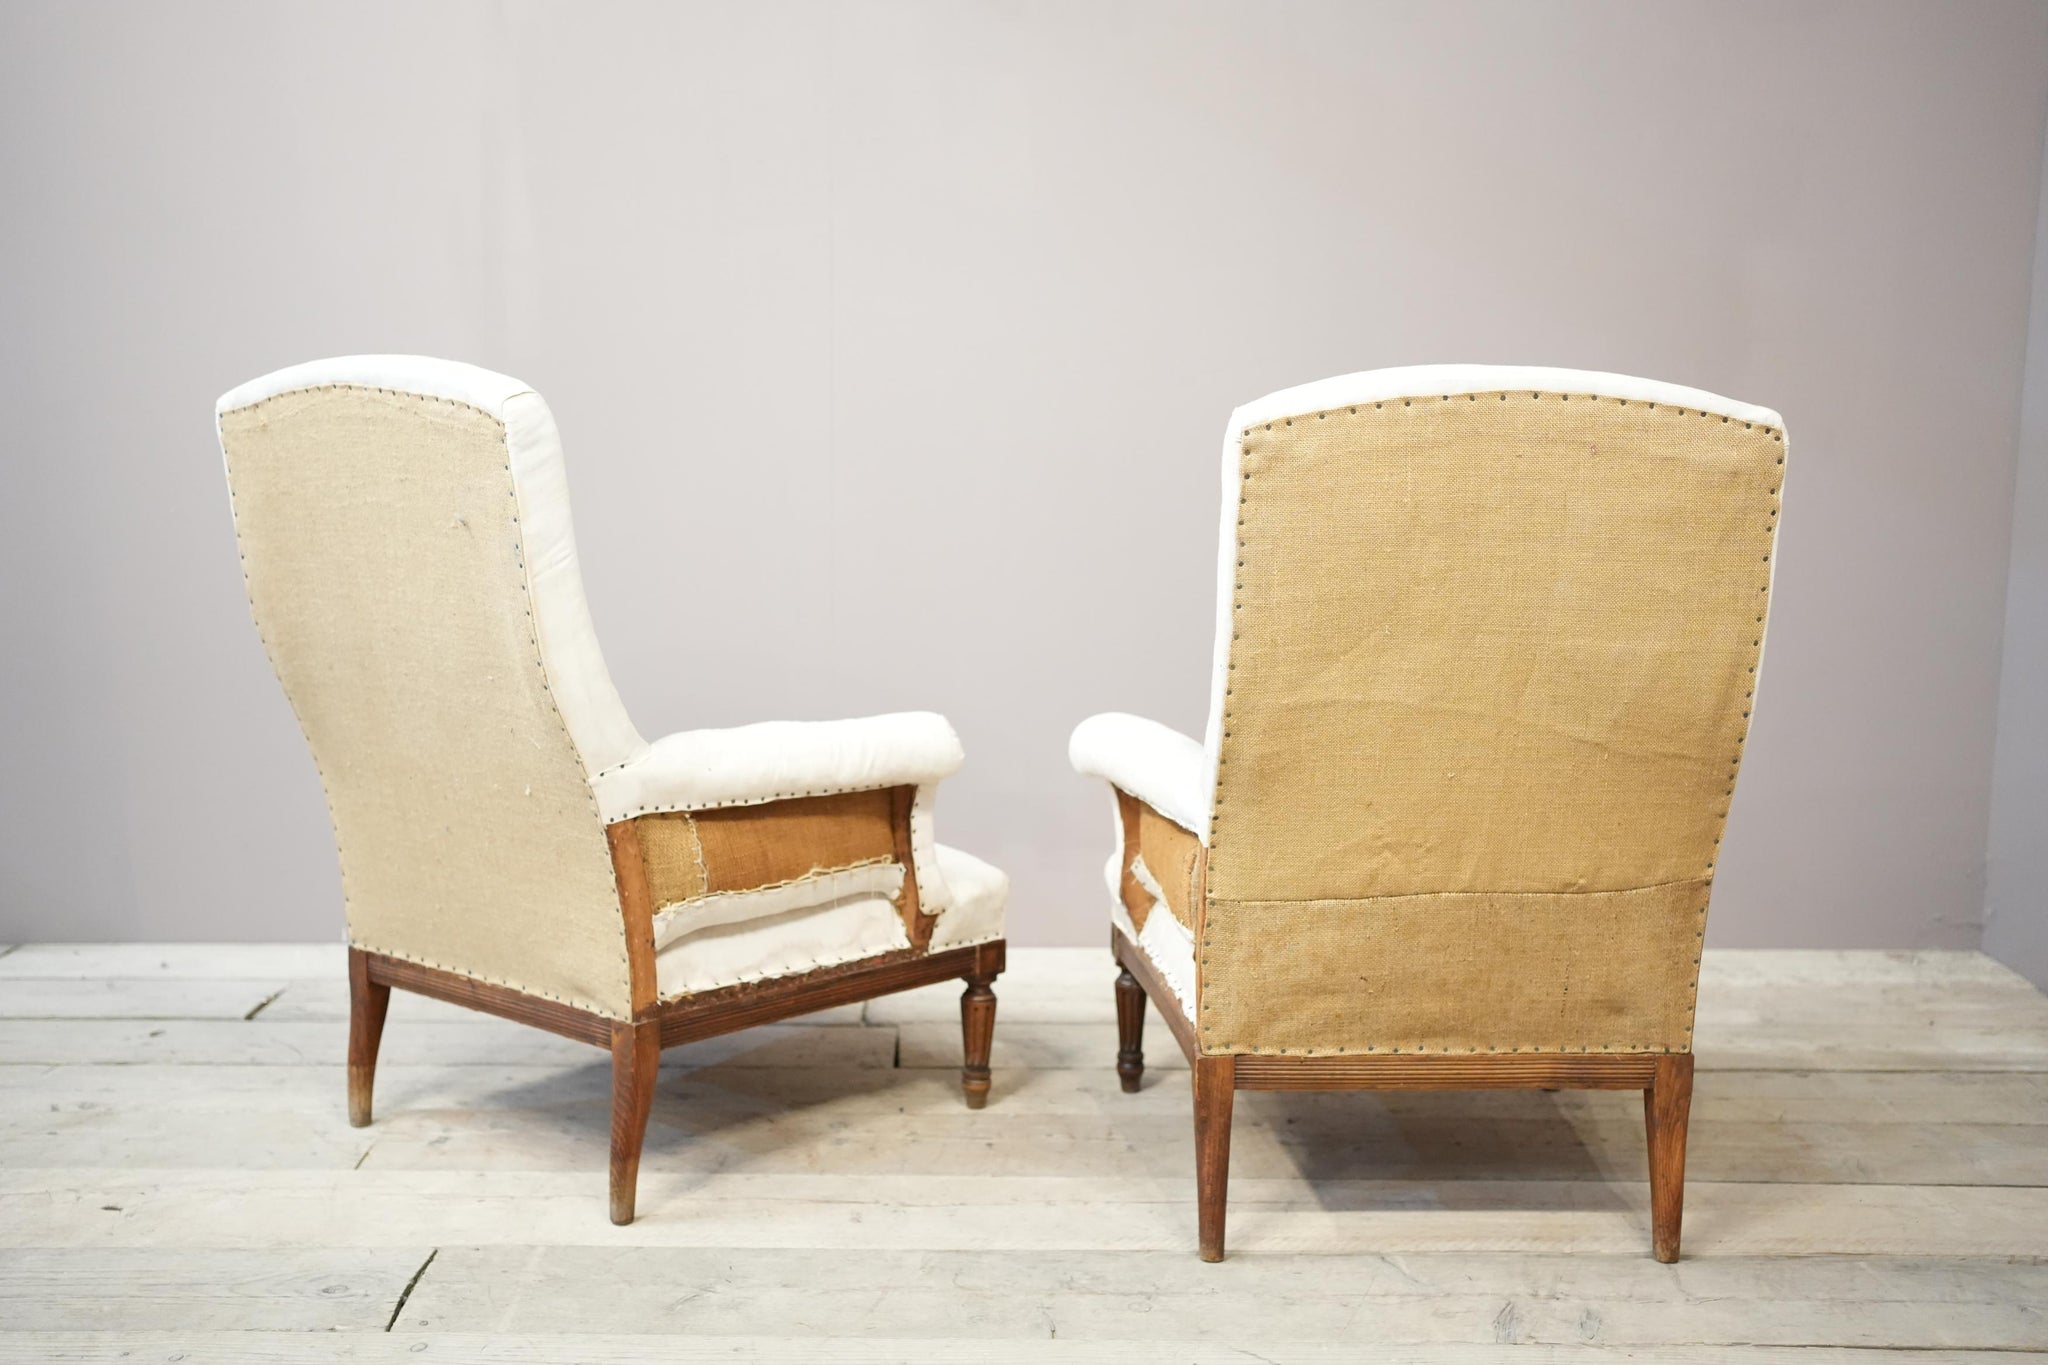 Pair of 19th century square back armchairs with carved frame